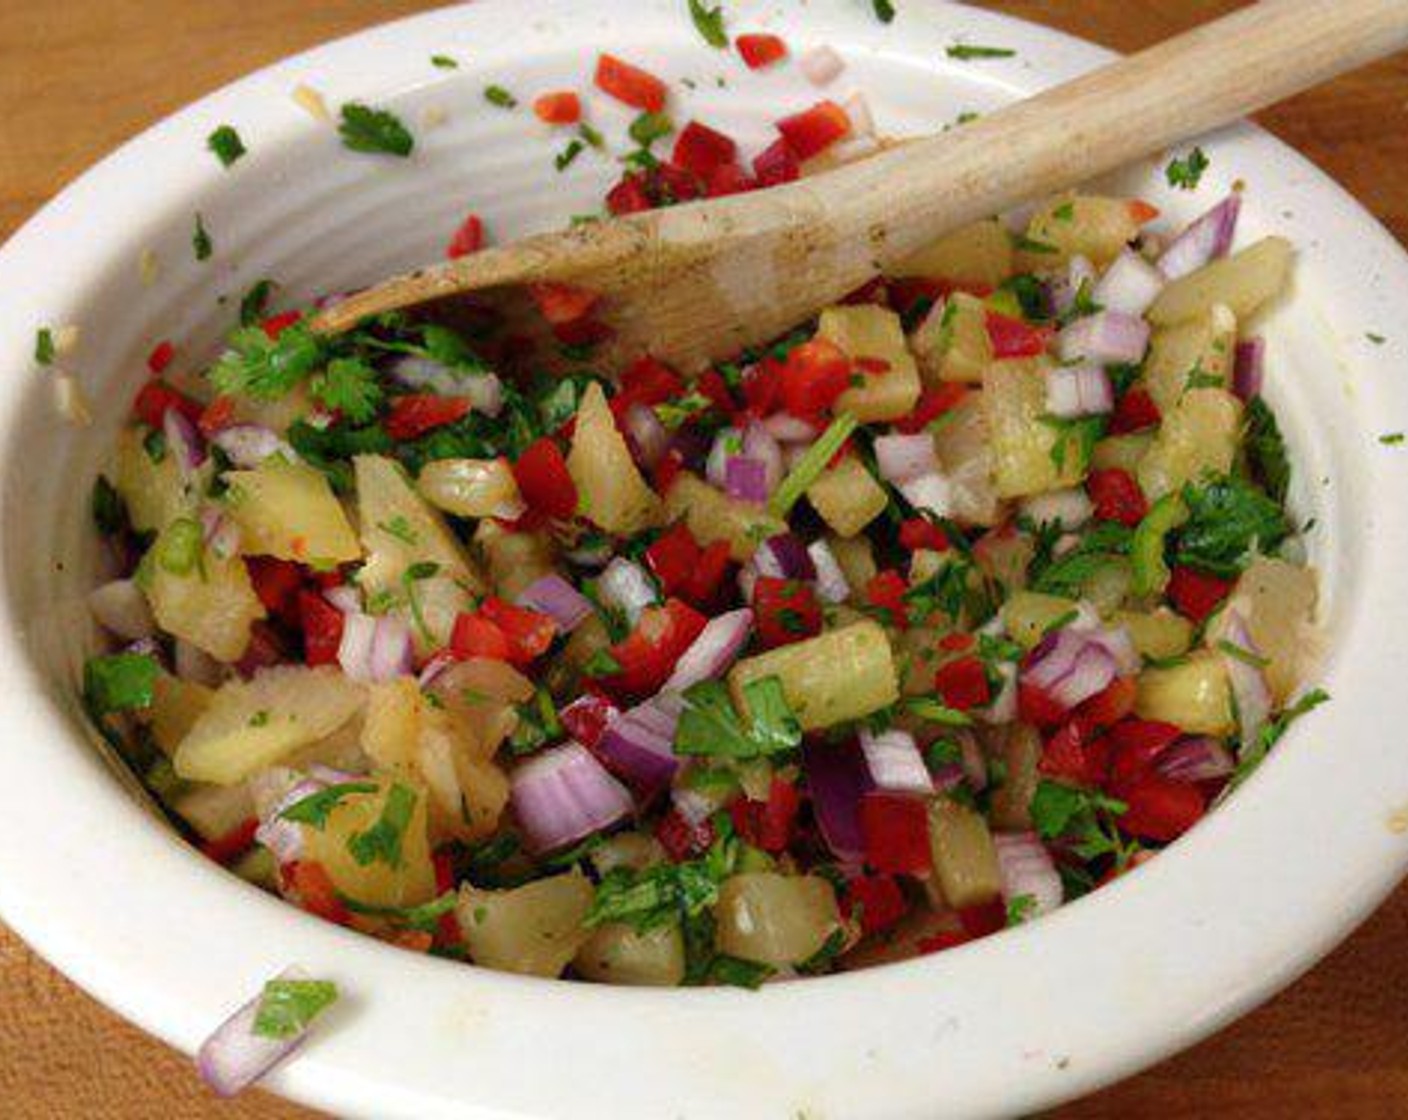 step 2 While the marinade is working put the salsa together. Combine Pineapple (1/2), Red Onion (1/2), Red Chili Pepper (1/2), Garlic (1 clove), Fresh Cilantro (1/4 cup), Serrano Chili (1), Limes (2), and All-Purpose Spice Rub (to taste) in a bowl and refrigerate.